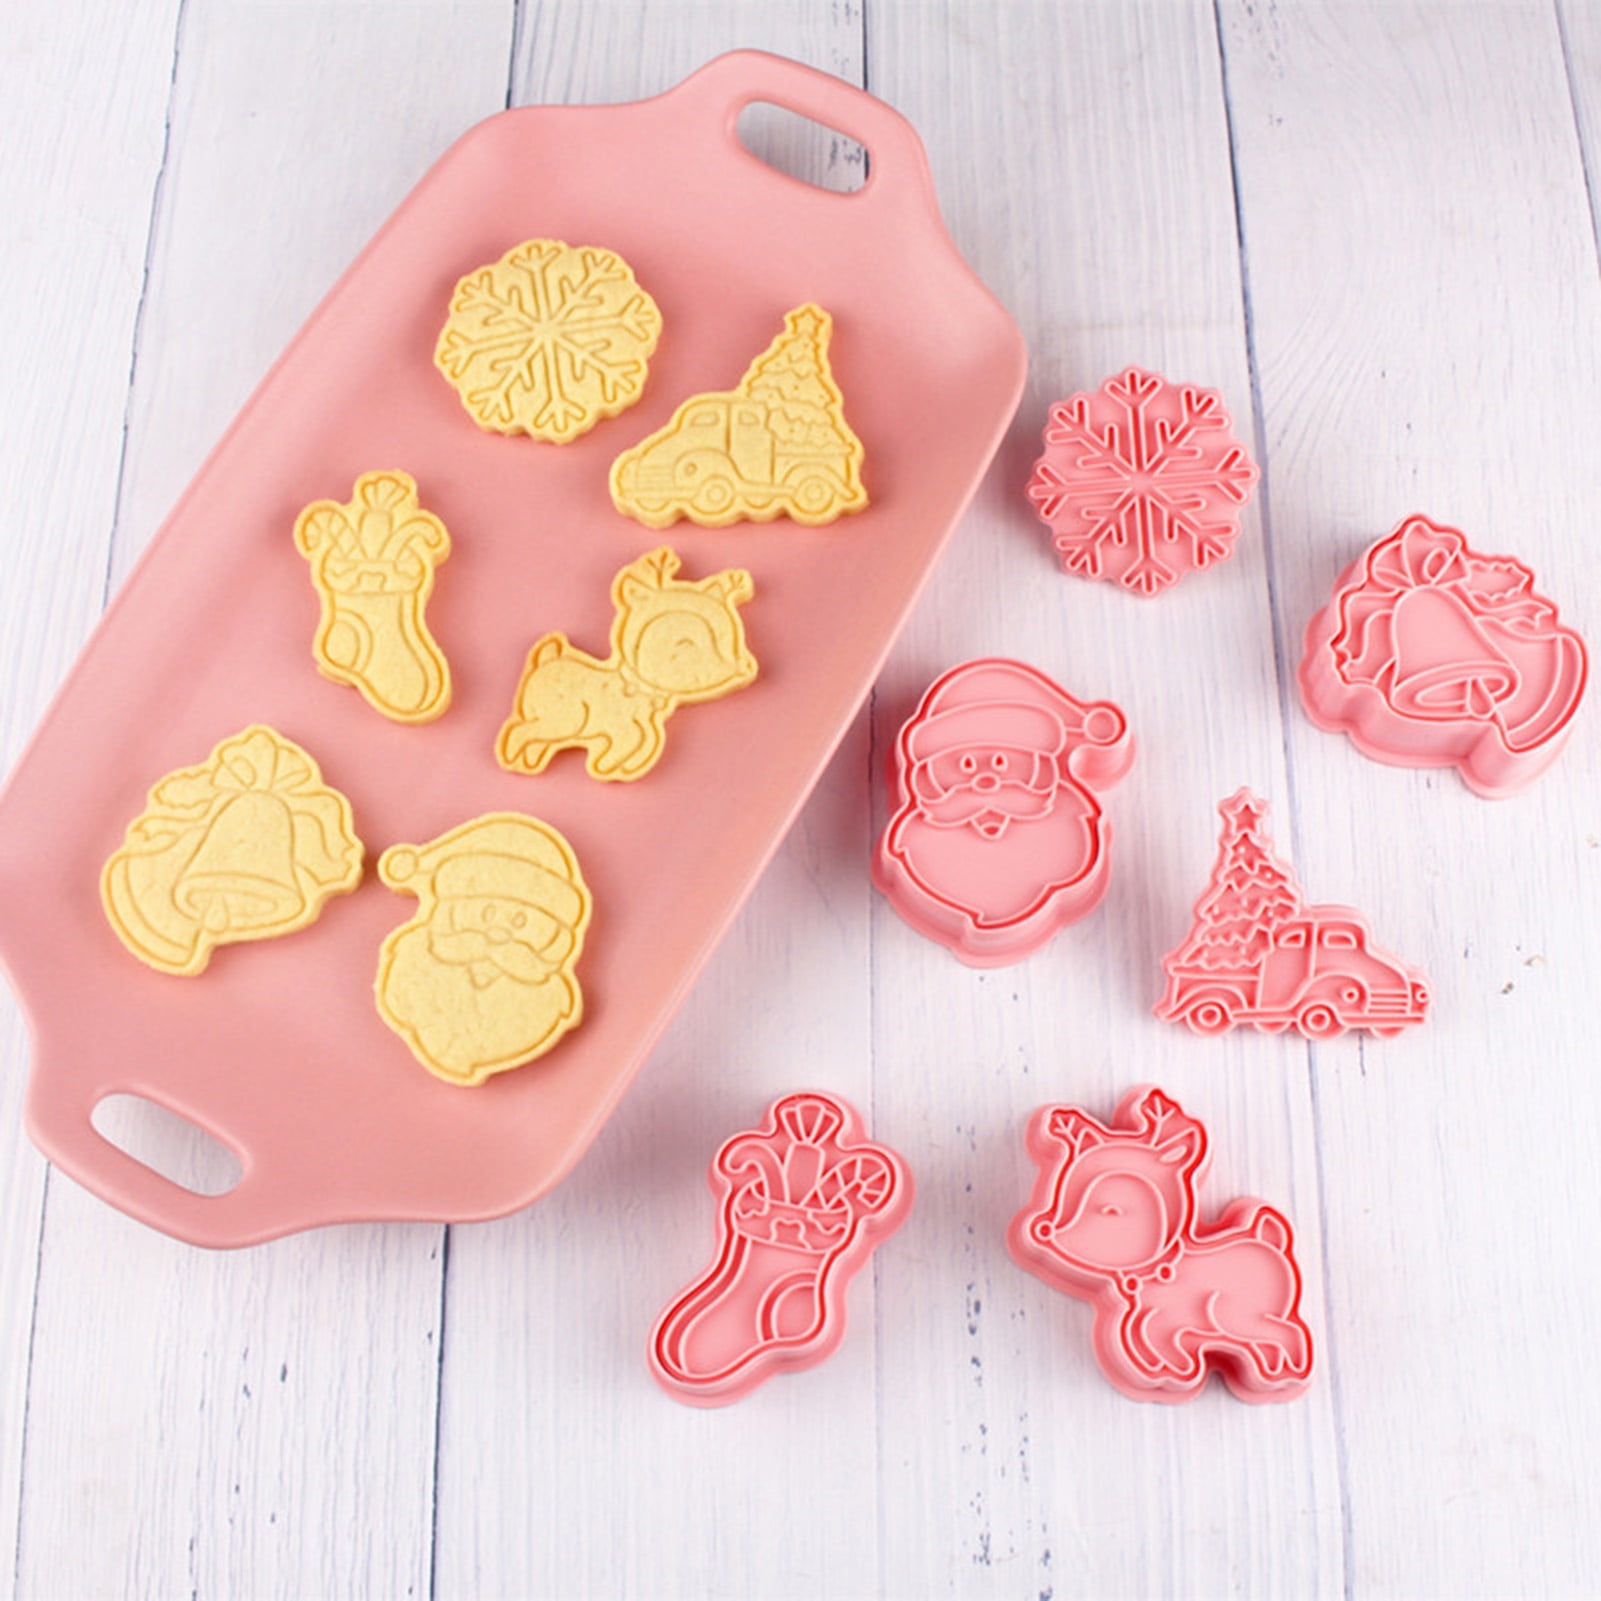 Details about   New Cat Head Cookie Cutter Polymer Clay Jewelry Fondant Biscuit Dough Cutters 